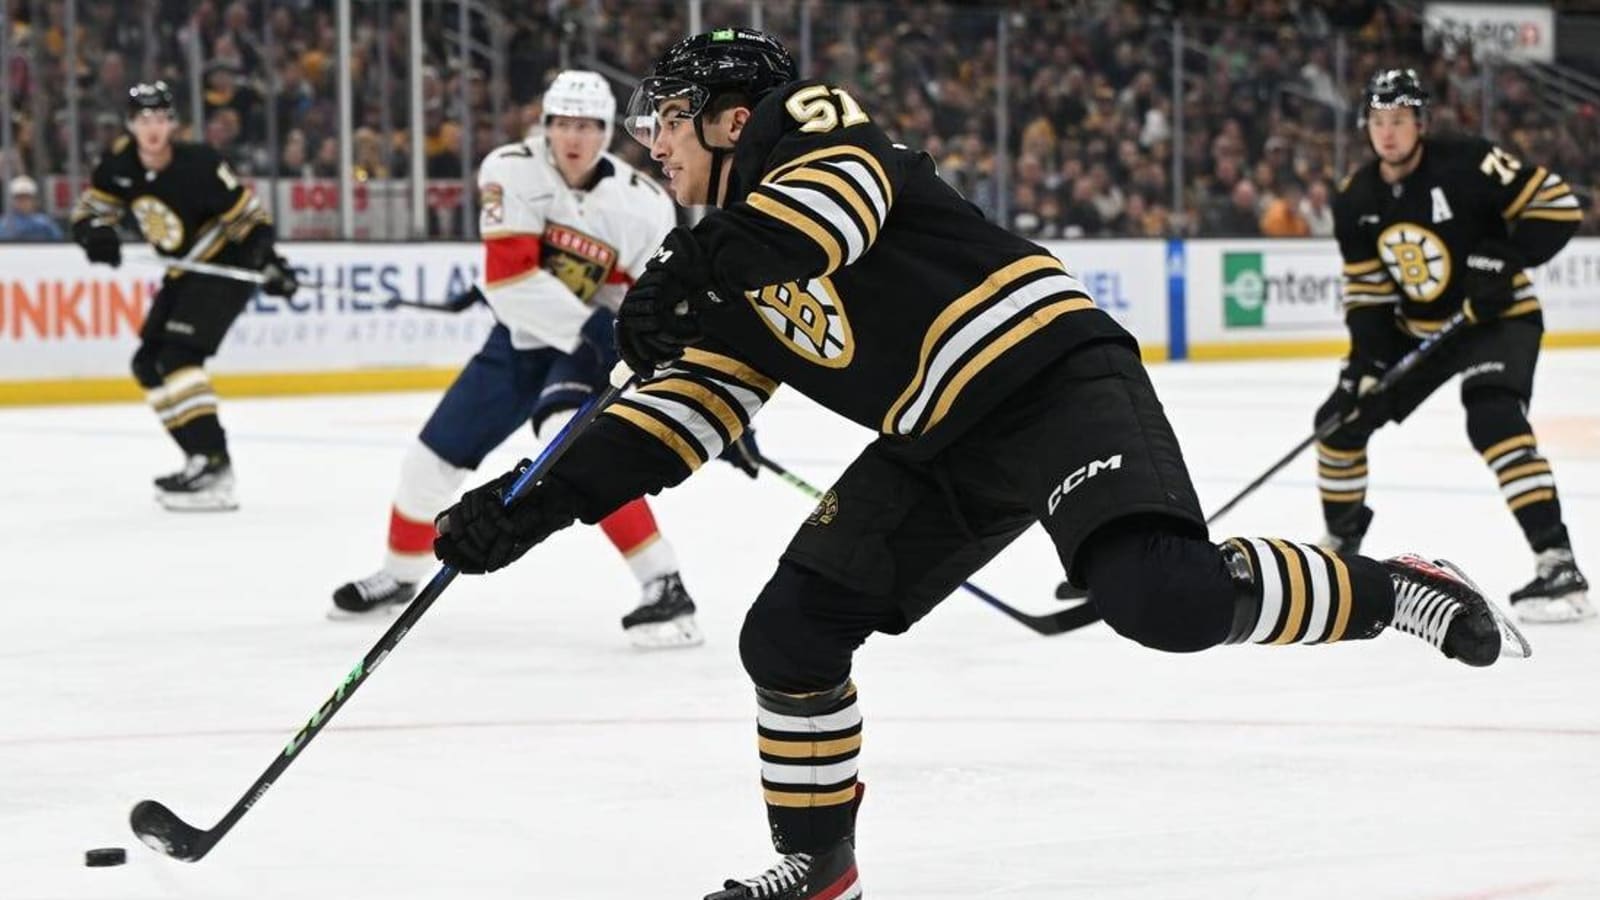 Down two defensemen, first-place Bruins face Leafs